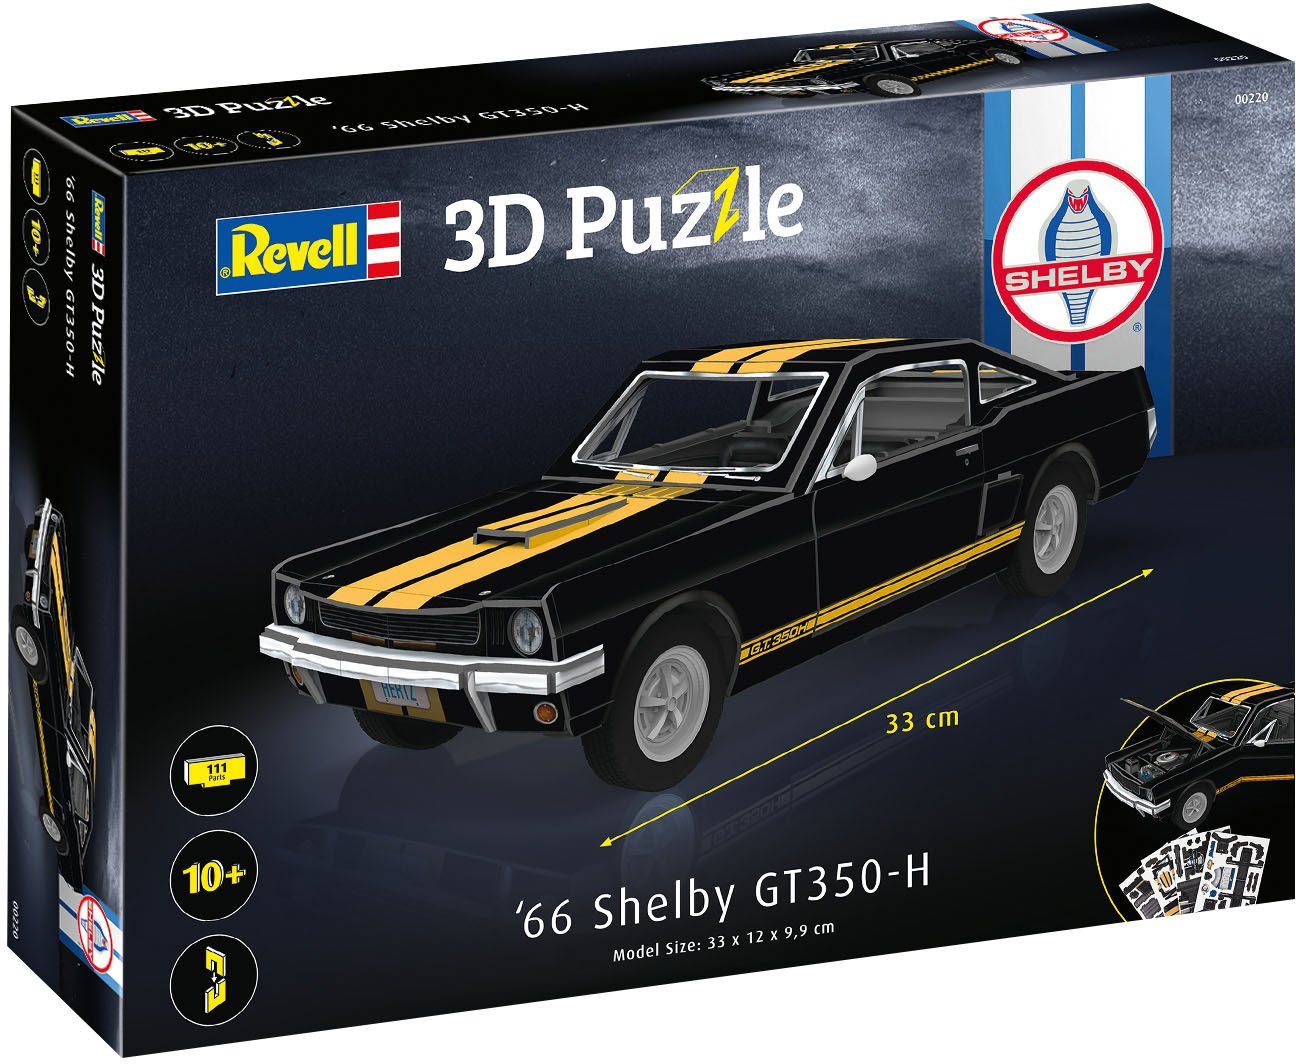 GT350-H, 3D-Puzzle 66 Shelby Puzzleteile 111 Revell®